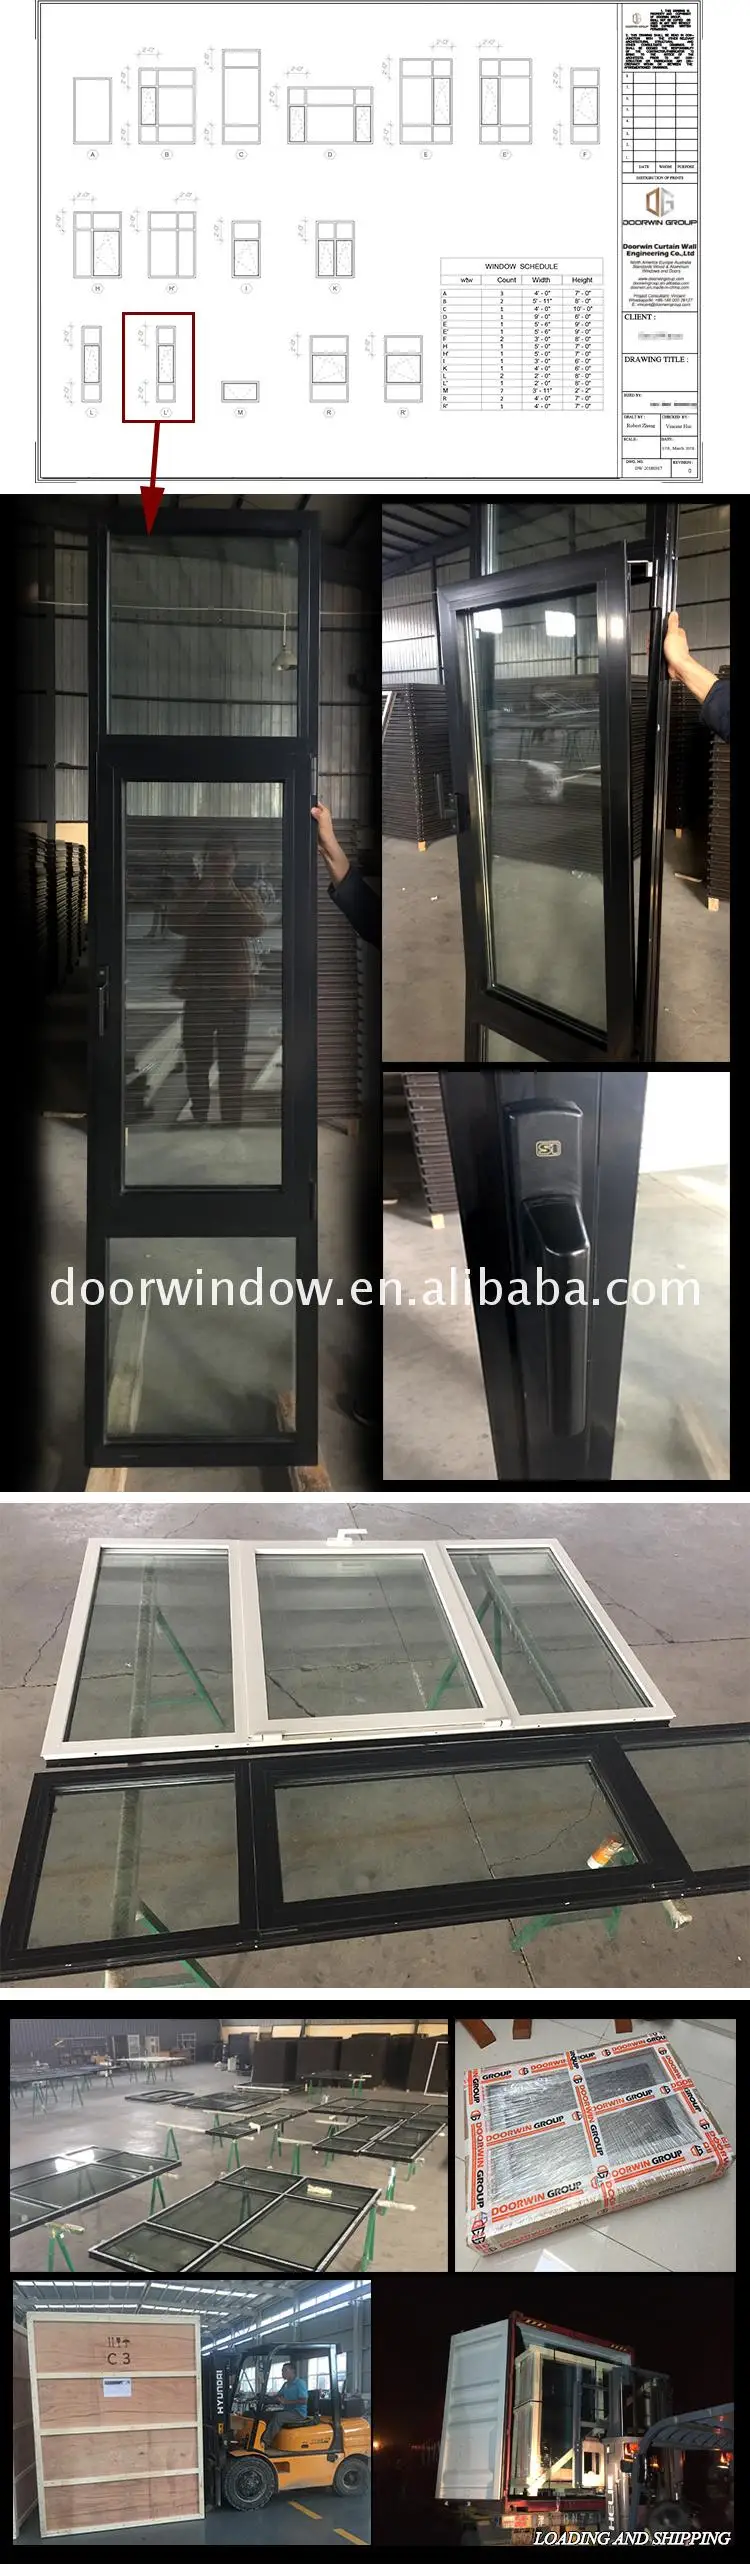 Hot new products Energy efficient Casement Windows and Doors Door with tempered Glass Low-e UV-resistant